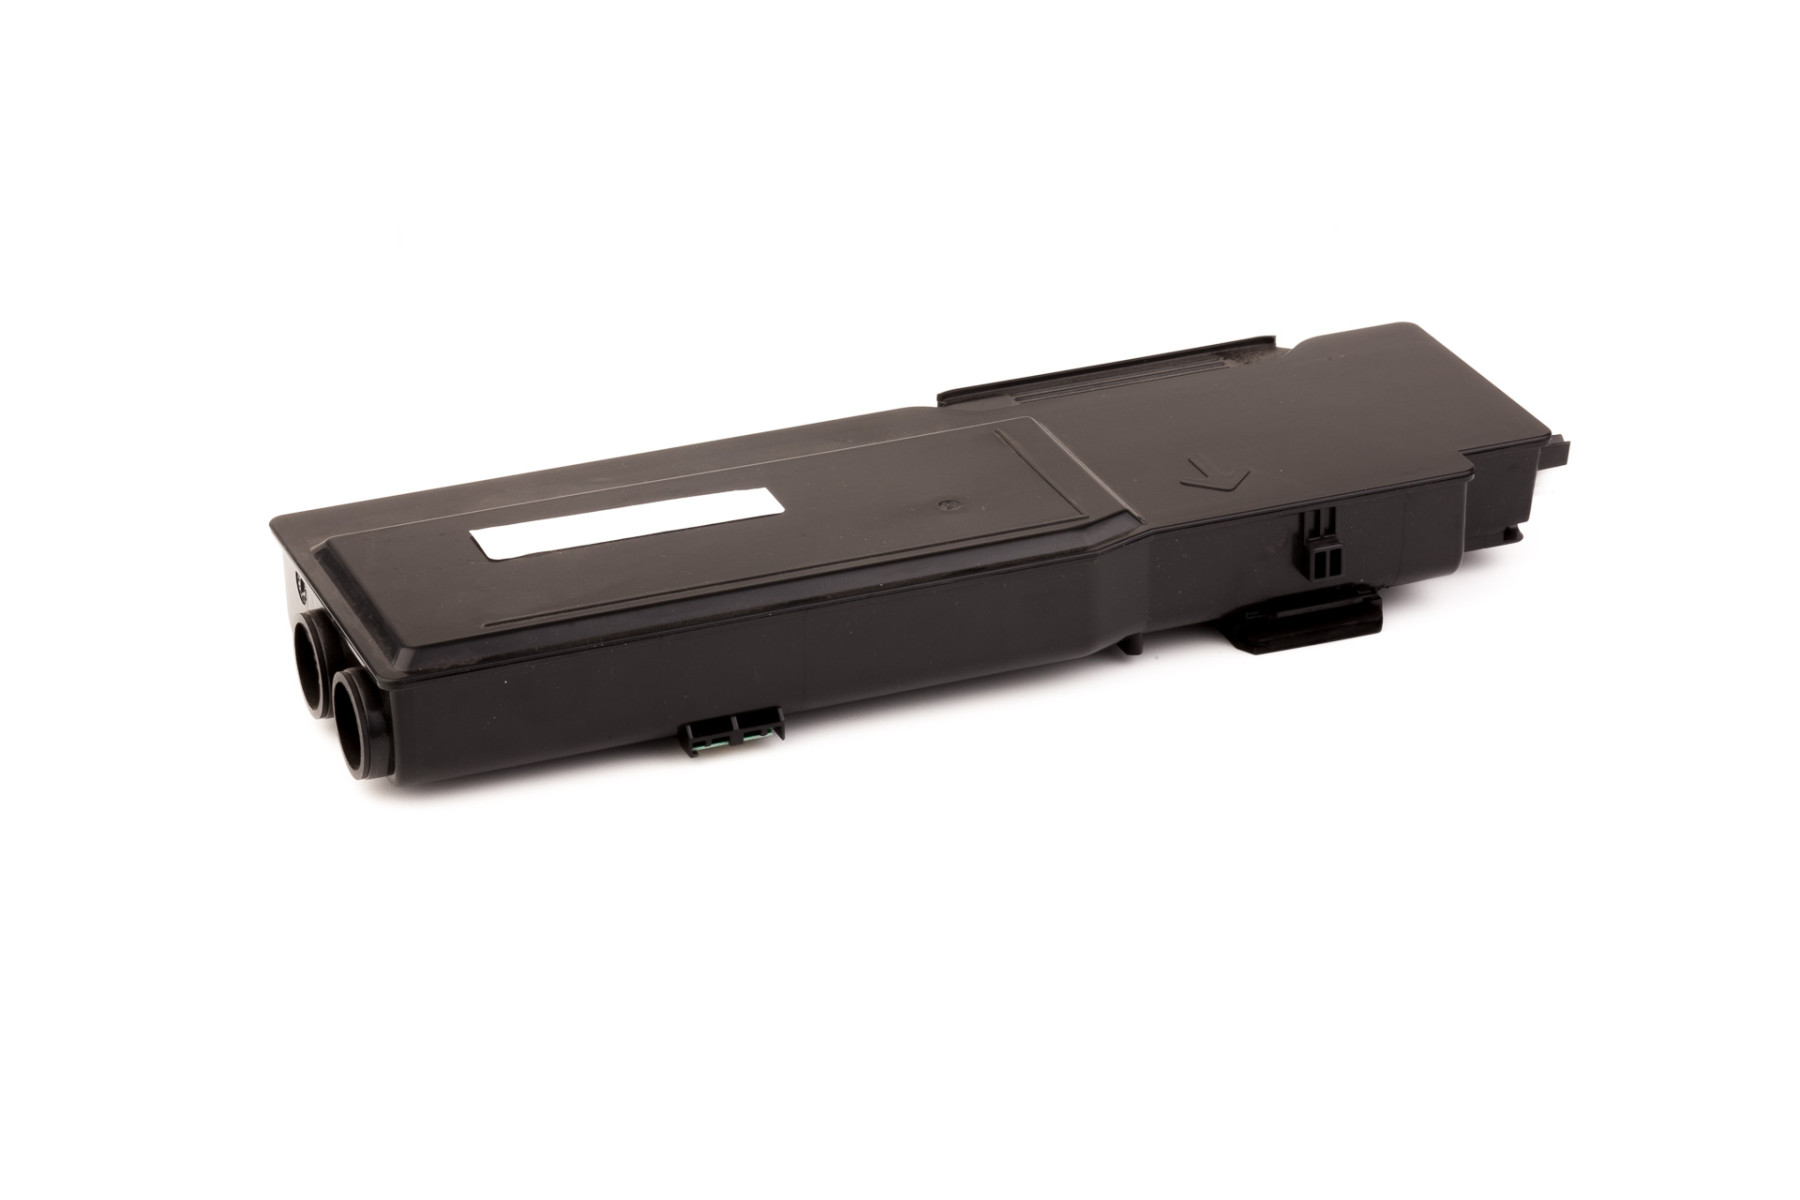 Set consisting of Toner cartridge (alternative) compatible with Dell - 59311119/593-11119 - 4CHT7 - C 3760 DN black, 59311118/593-11118 - 9FY32 - C 3760 DN cyan, 59311117/593-11117 - H5XJP - C 3760 DN magenta, 59311116/593-11116 - RGJCW - C 3760 DN yellow